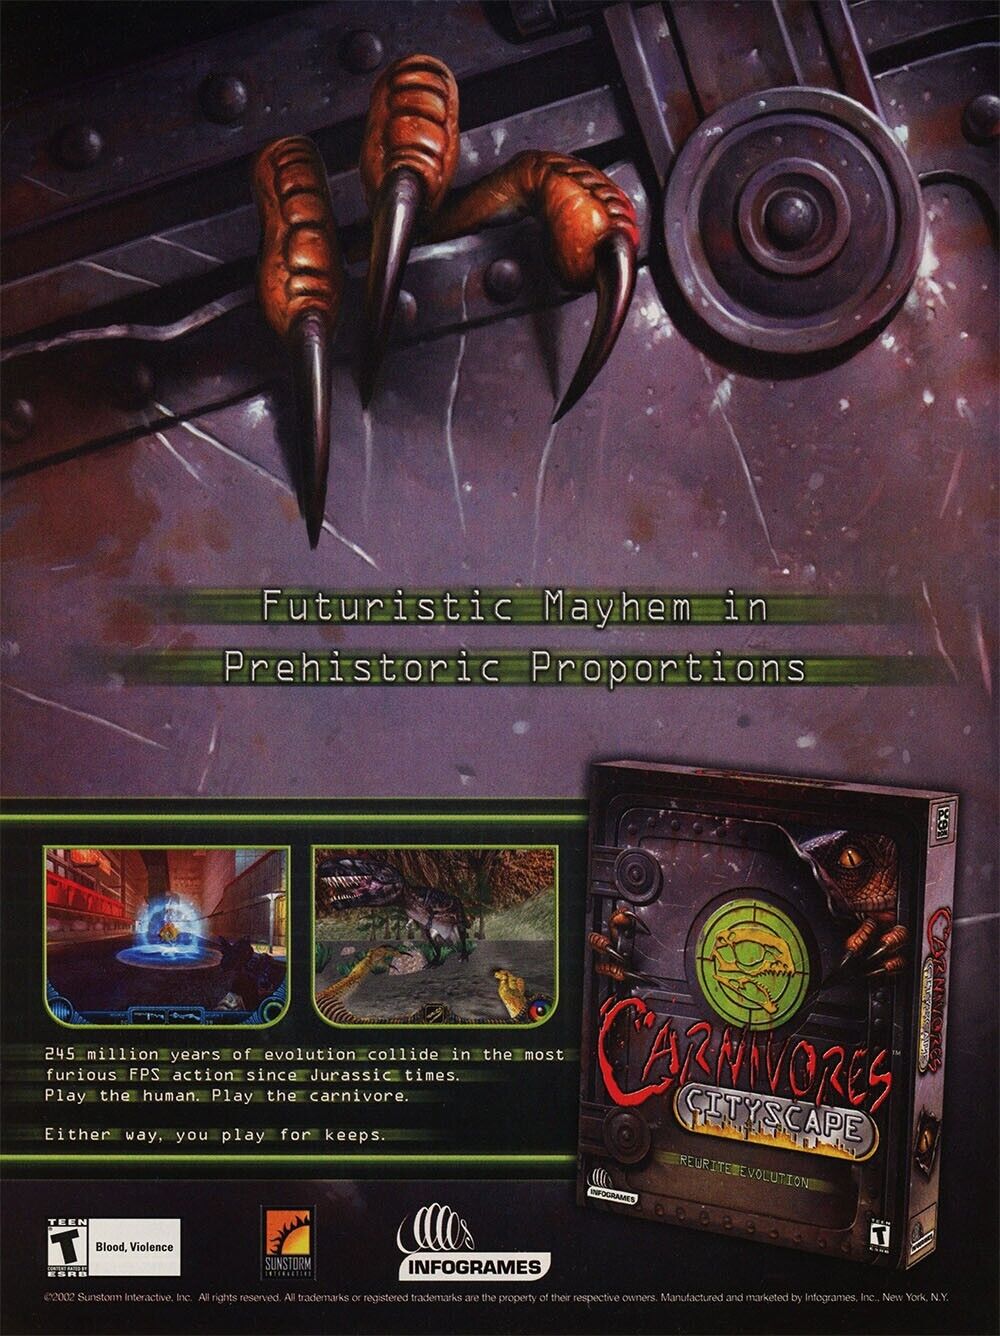 Carnivores Cityscape PC Original 2003 Ad Authentic FPS Shooter Video Game Promo